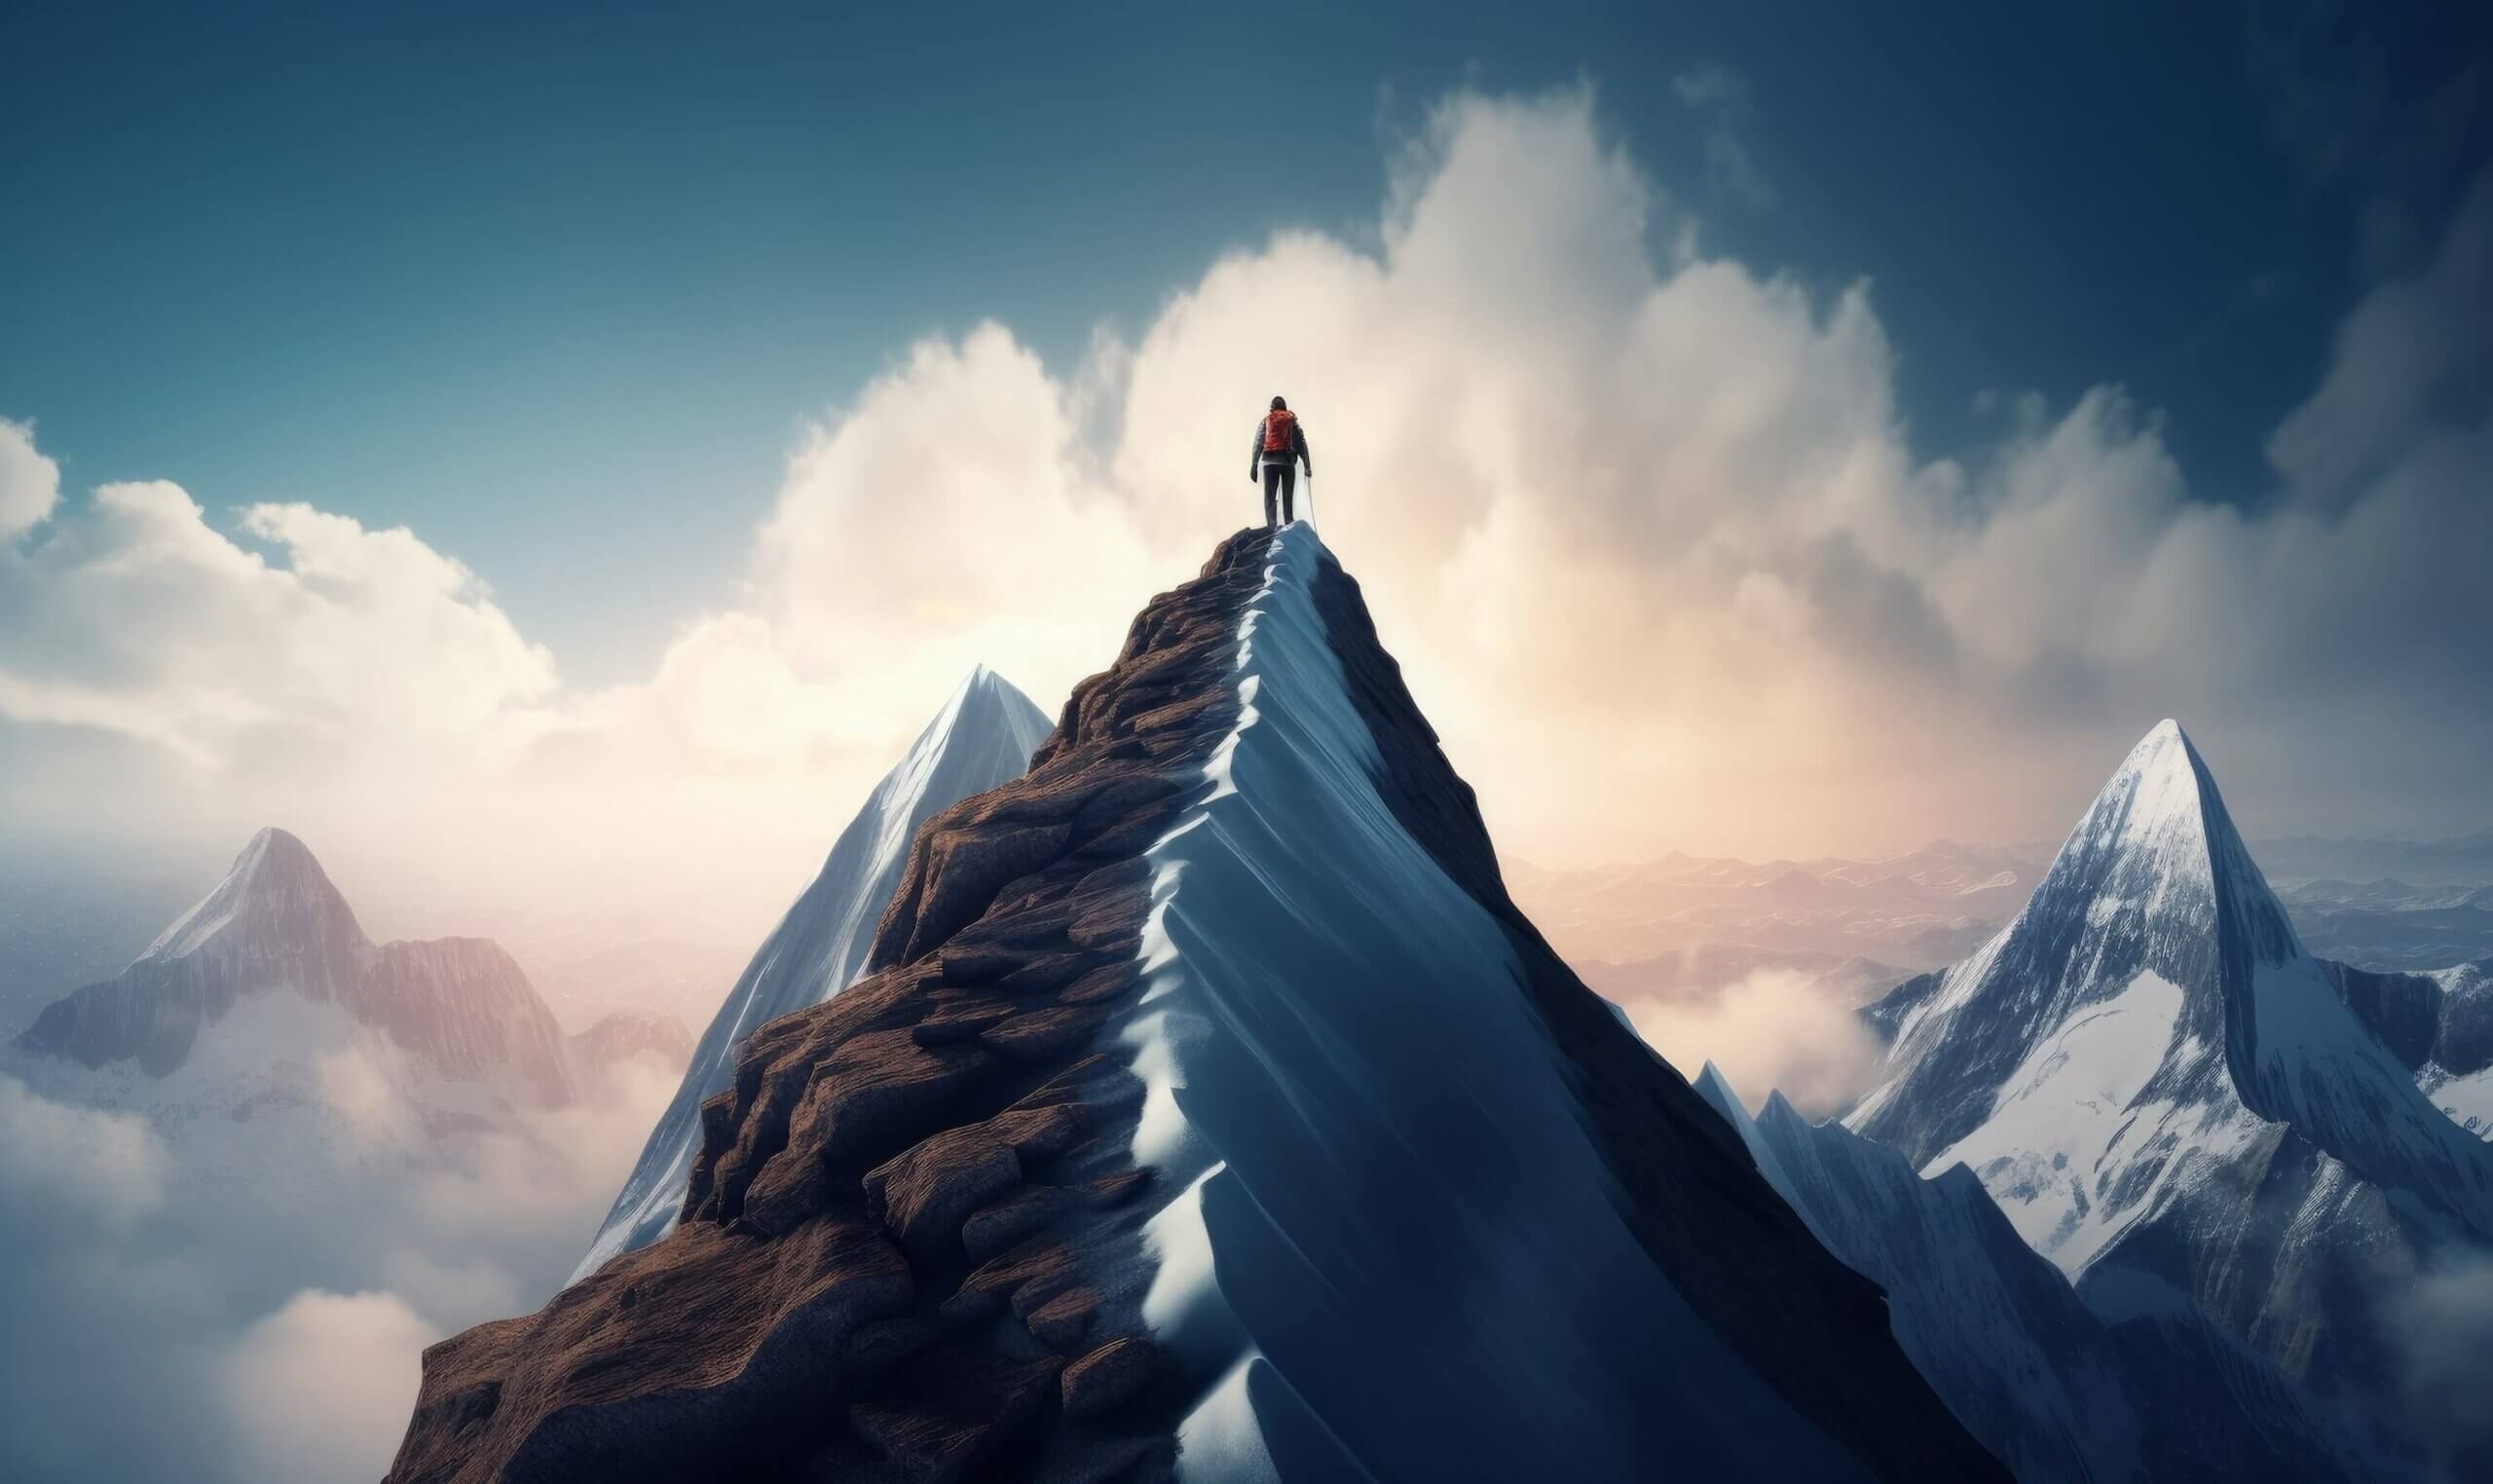 Image of a person scaling a mountain. Leadership performance.